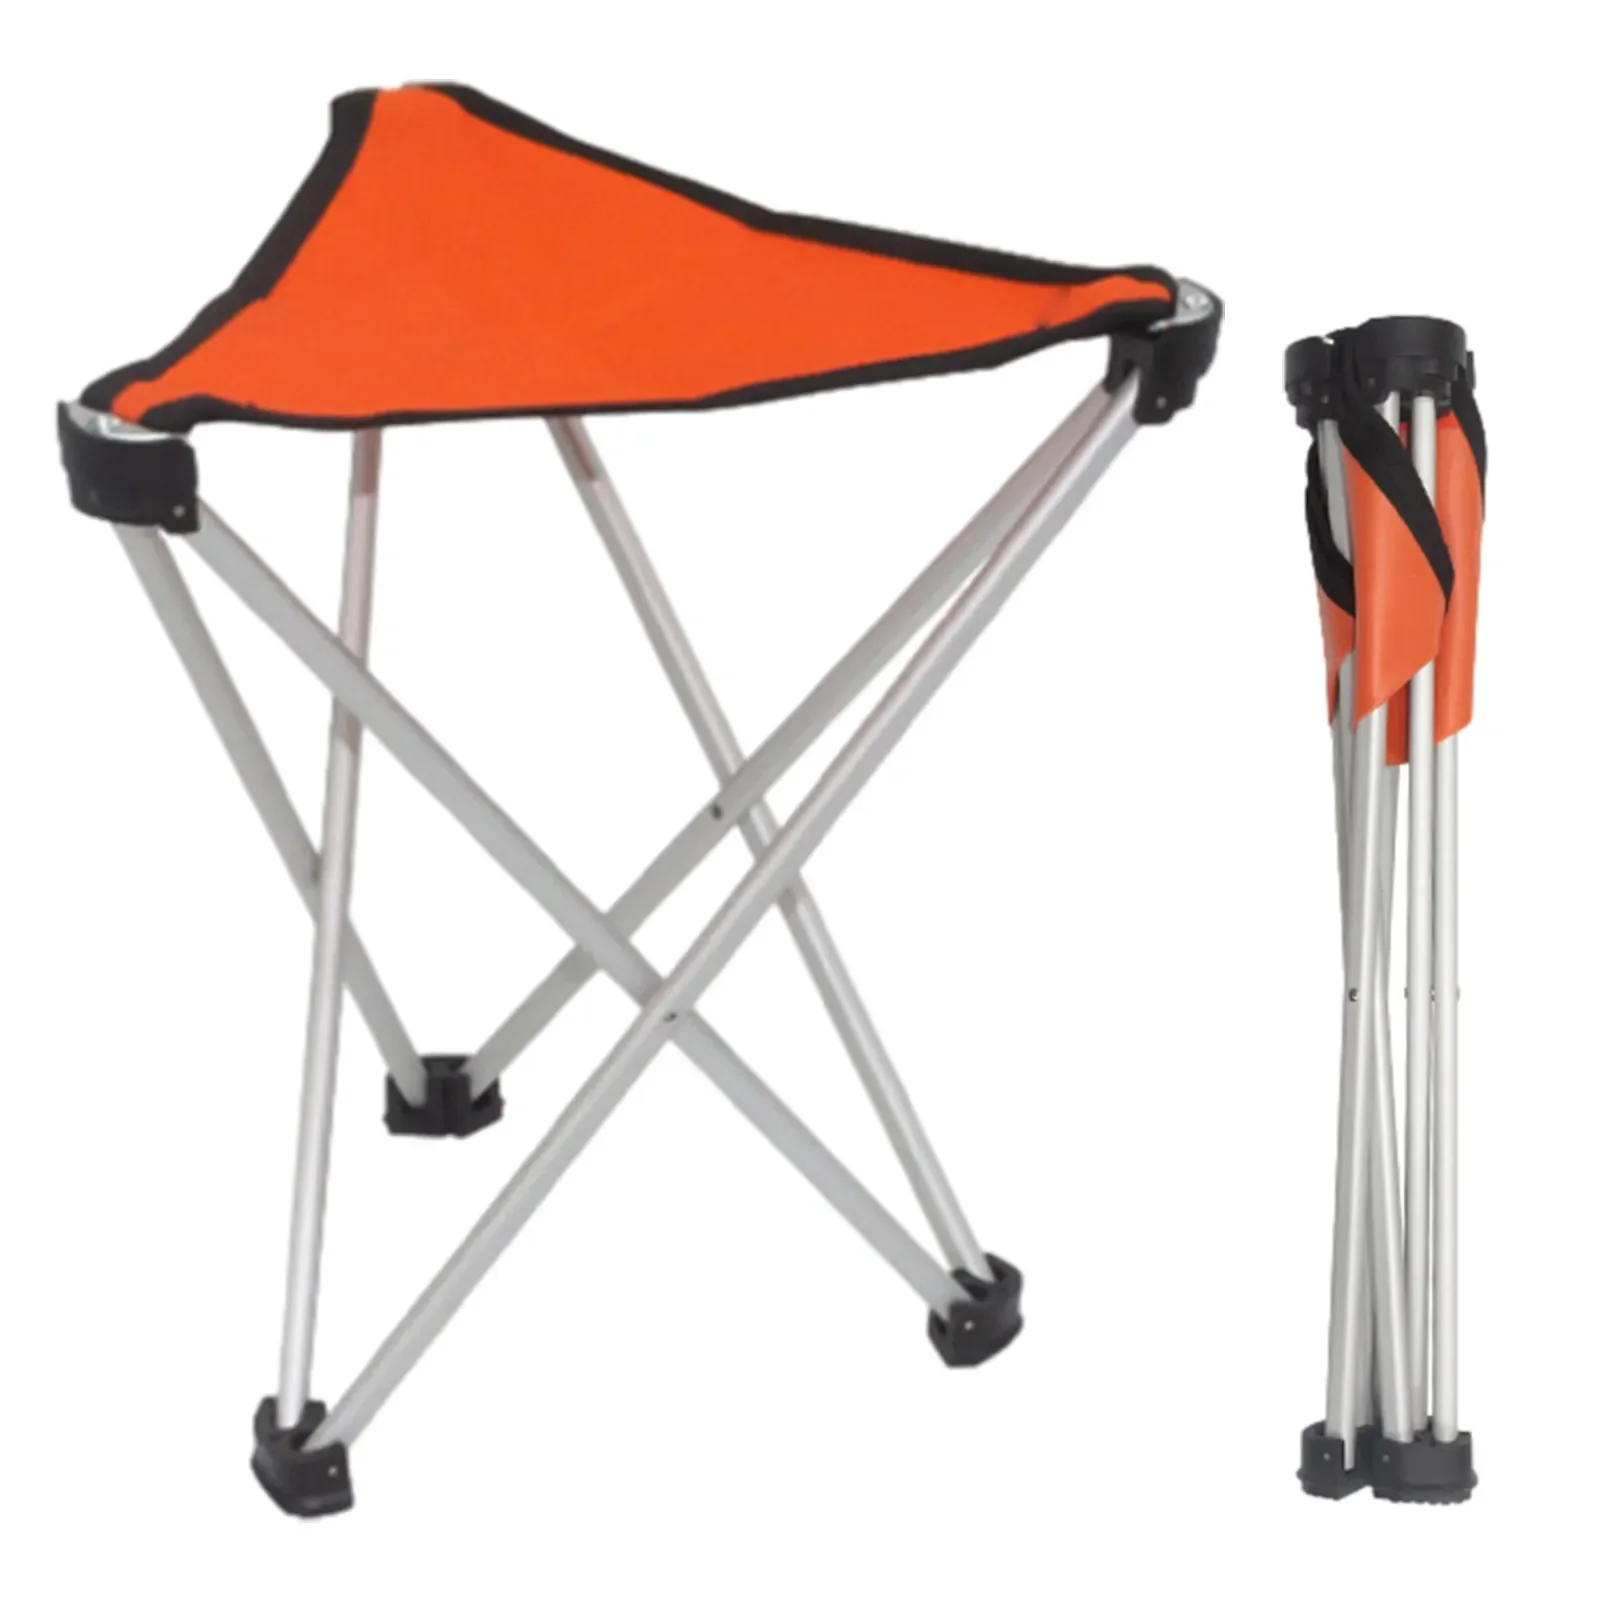 

Stool Folding Portable Fishing Chair Heavy Duty Tripod Seat Outdoor Triangulated Stools For Camping Travel Bbq